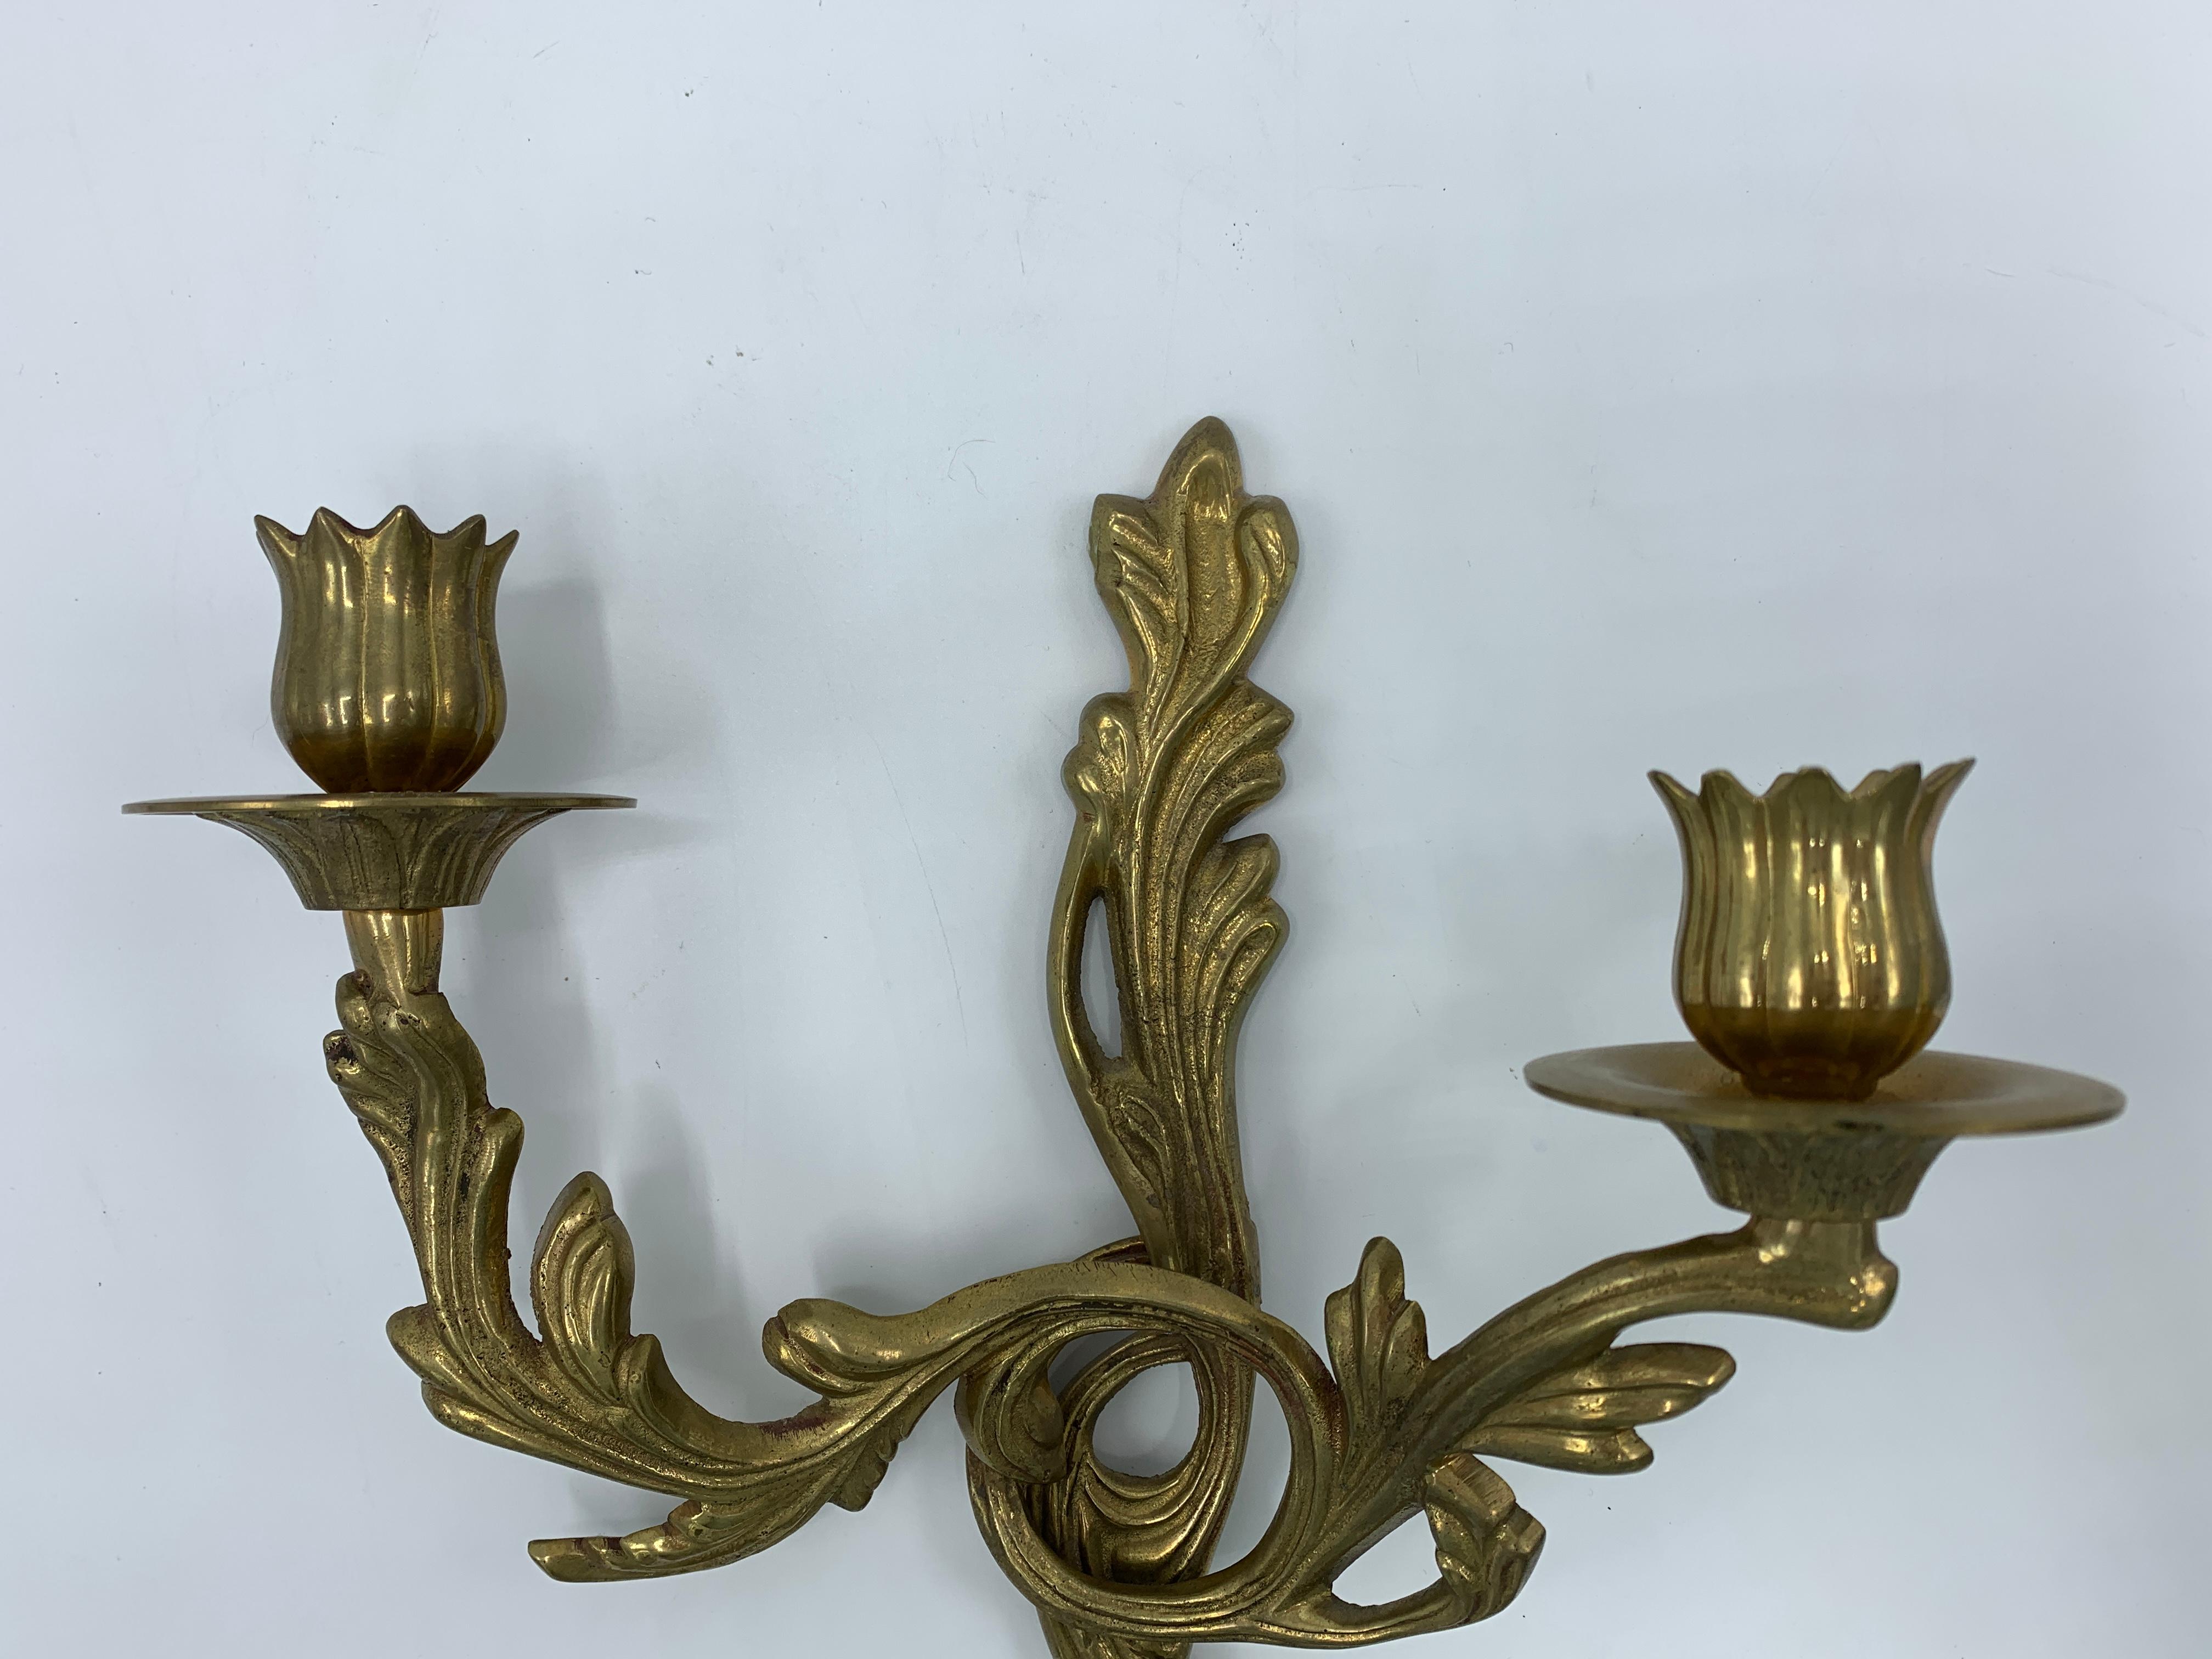 Offered is a pair of 1970s solid-brass, acanthus leaf candlestick wall sconces. Each has a hook on the backside for easy hanging. Attention to detail and craftsmanship were not overlooked when these pieces were created. Lovely detailing all-over.